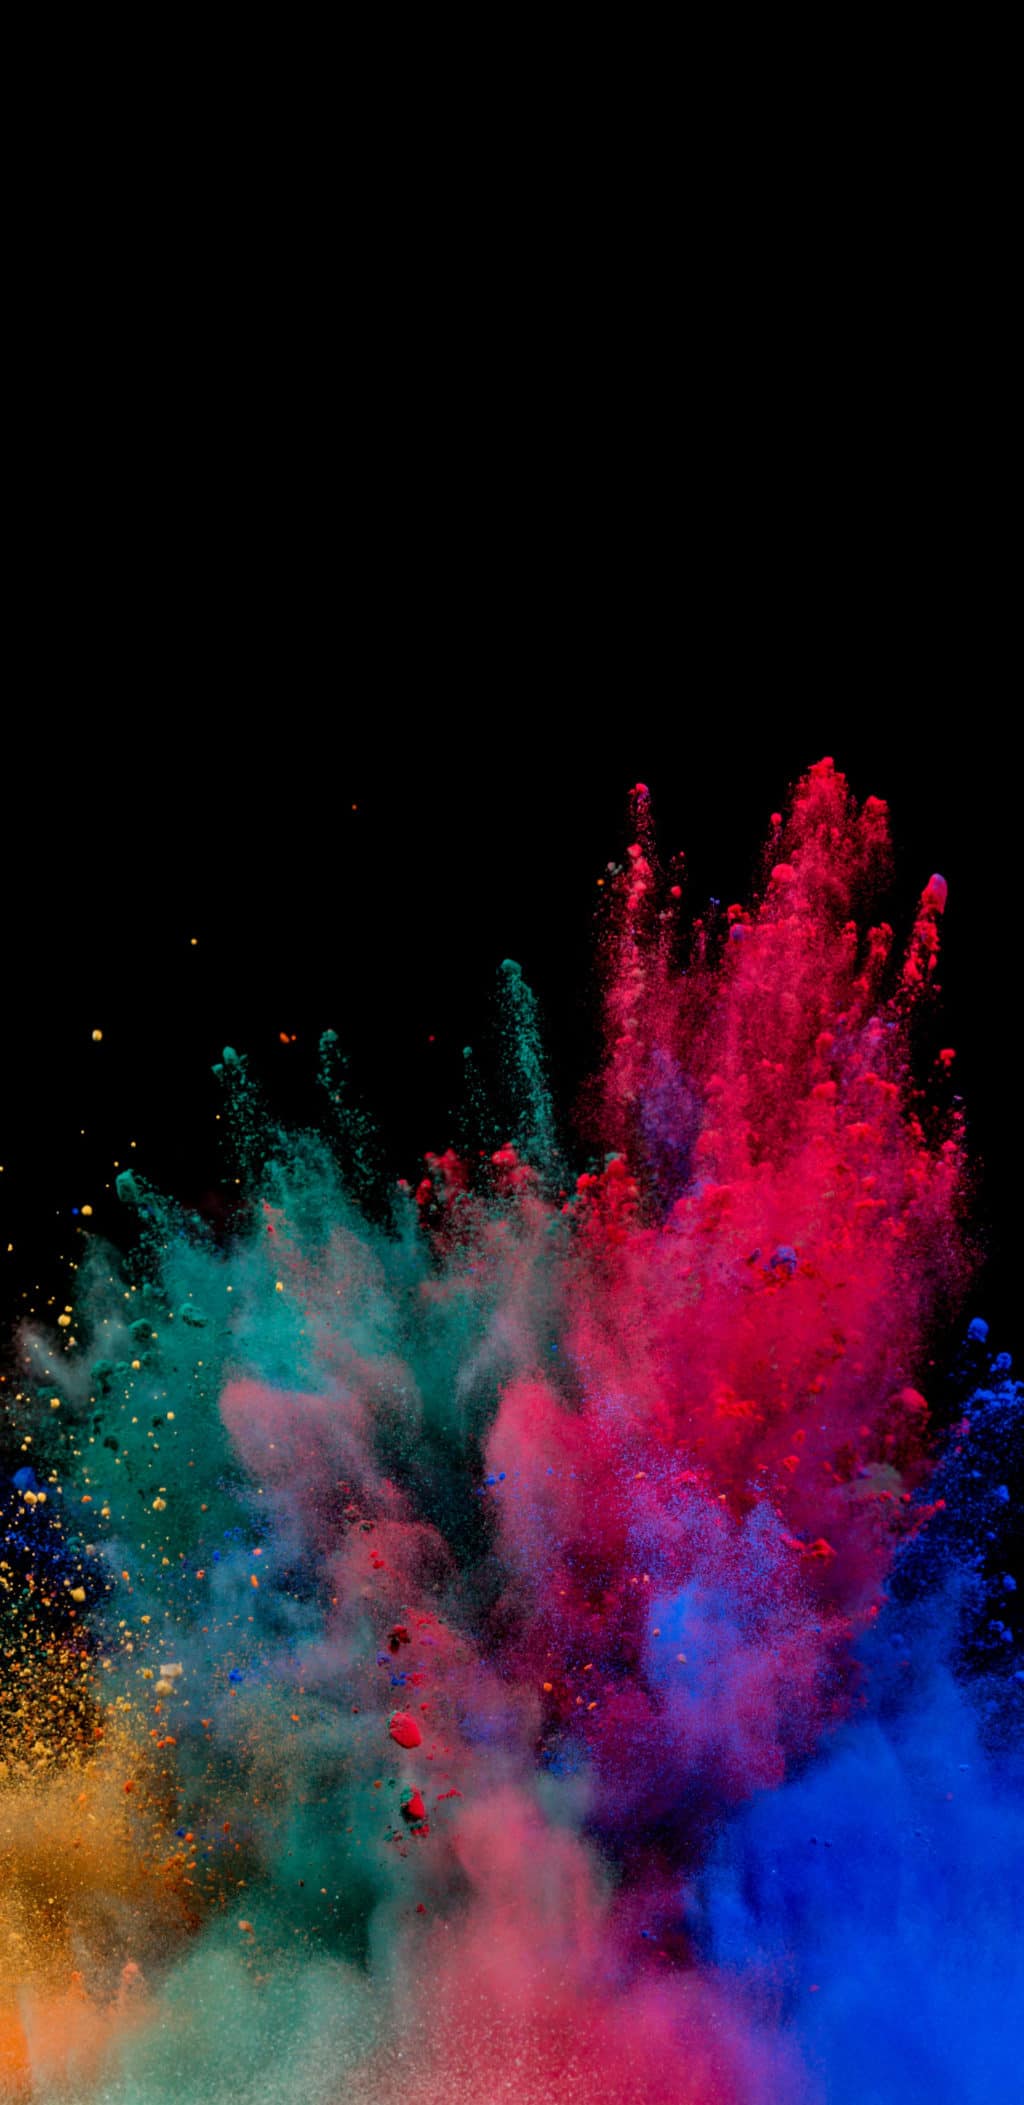 Samsung S9 Wallpapers - Top Free